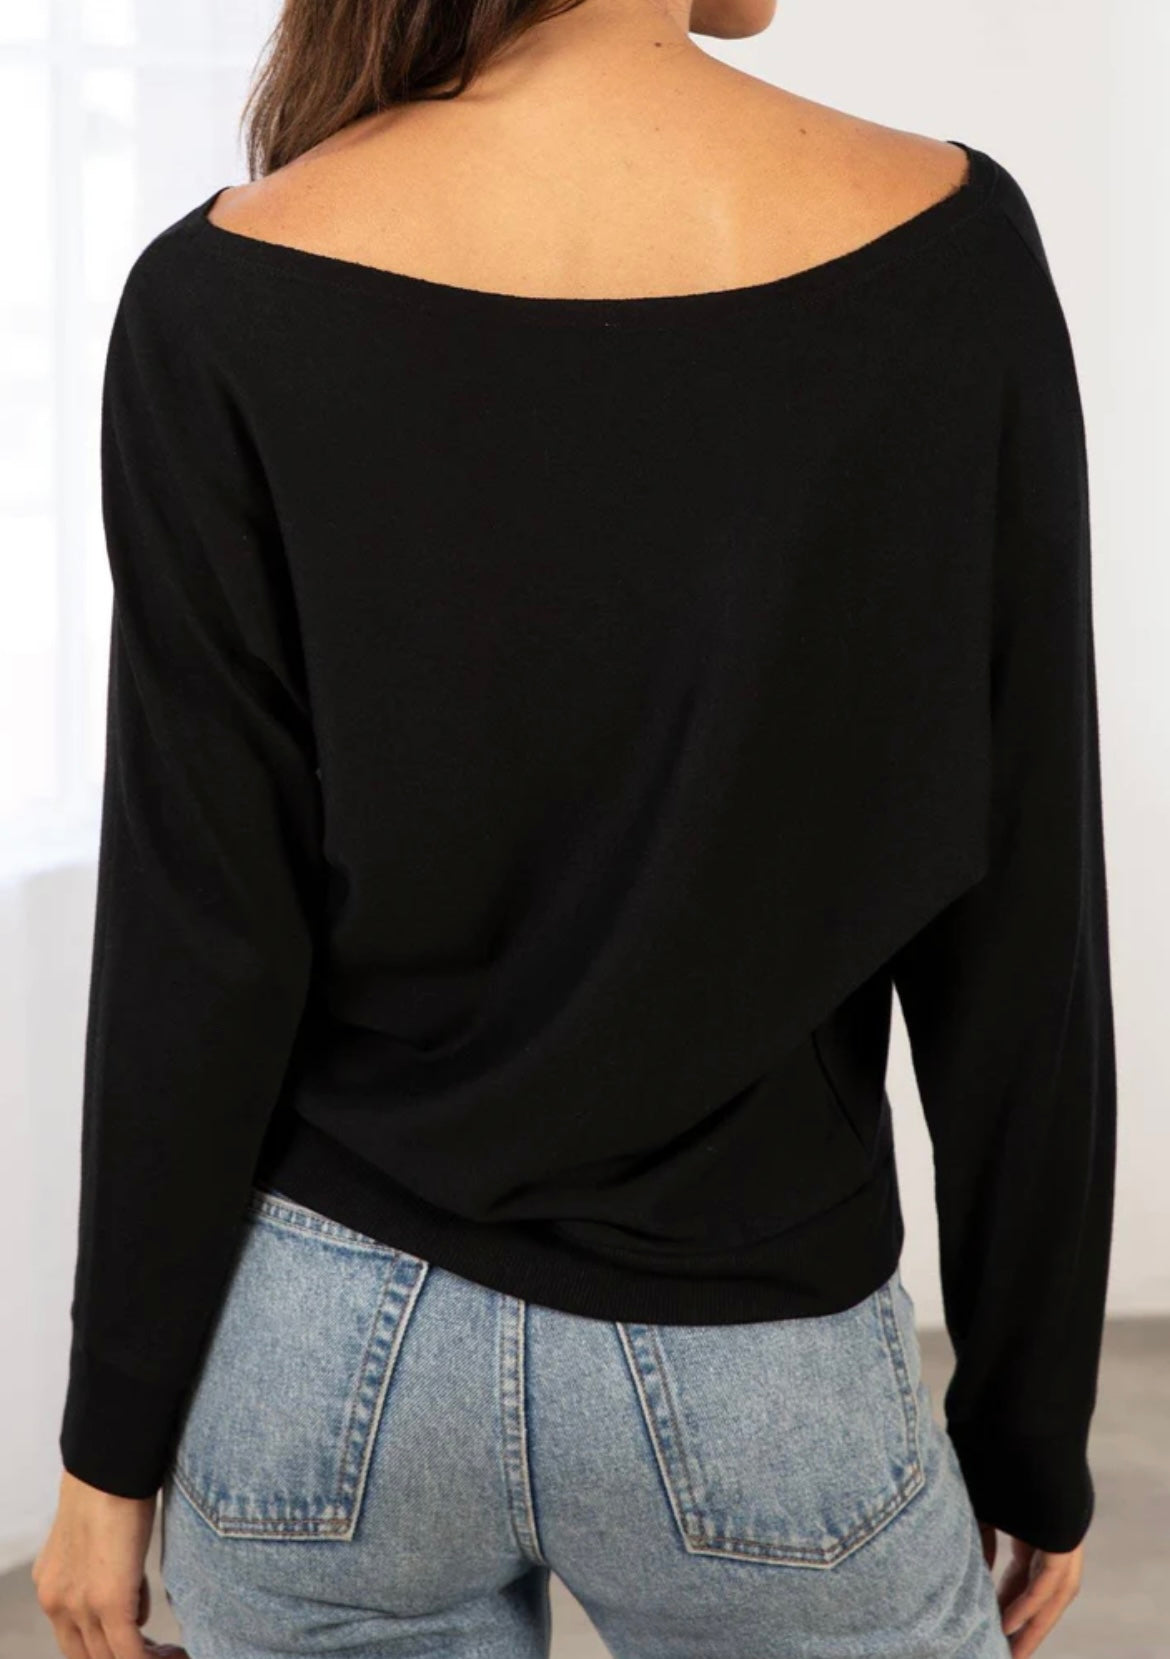 Ready To Go Off Shoulder Top